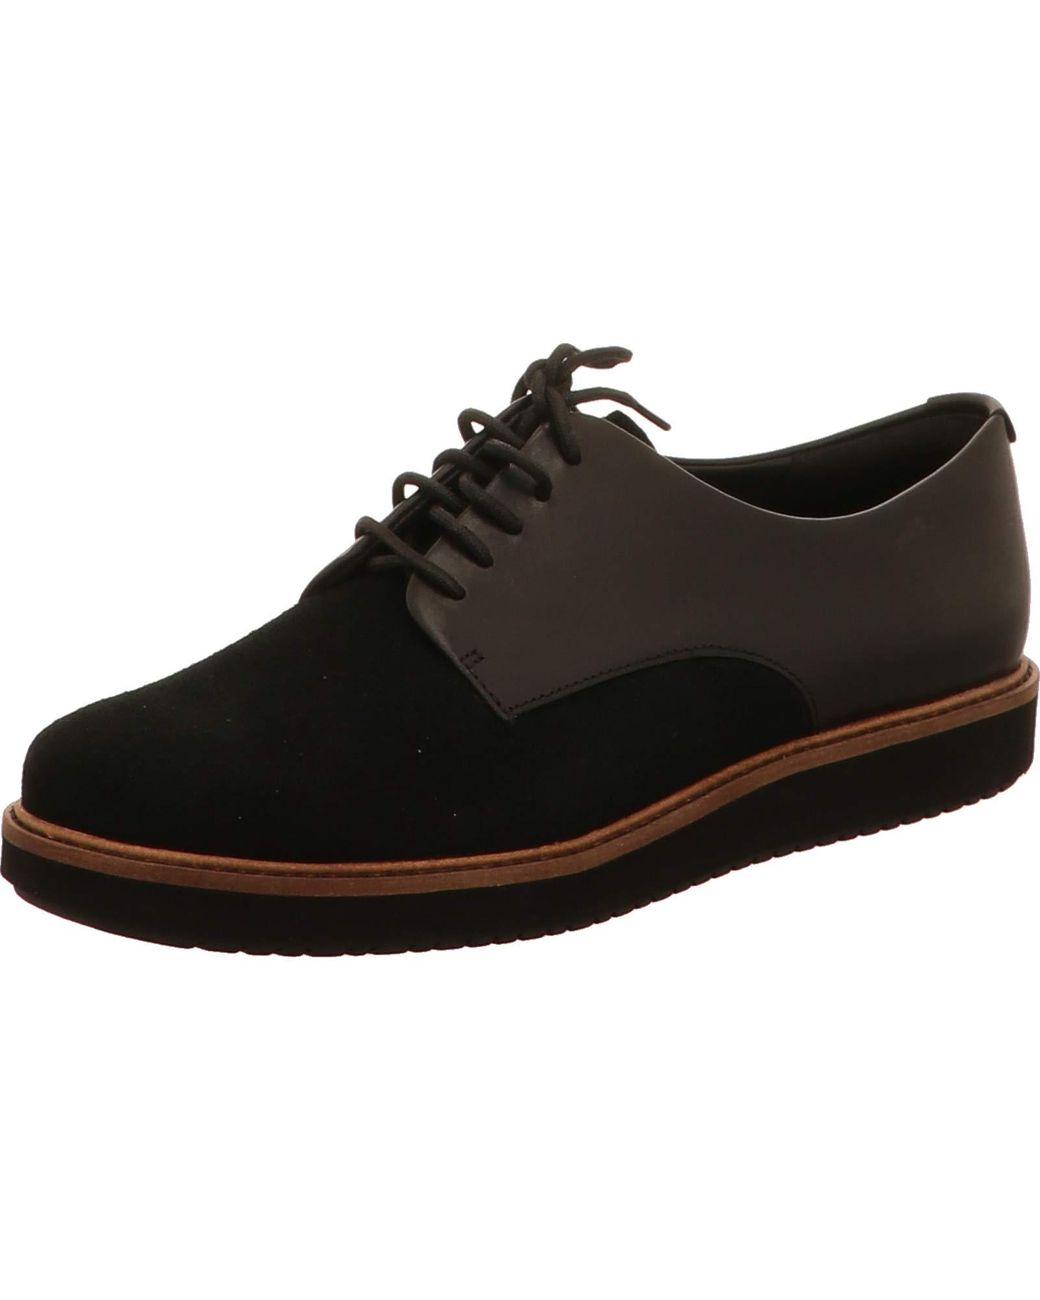 Clarks Glick Darby Derby Shoes & Brogue Shoes Black Derby Shoes Shoes Black  | Lyst UK